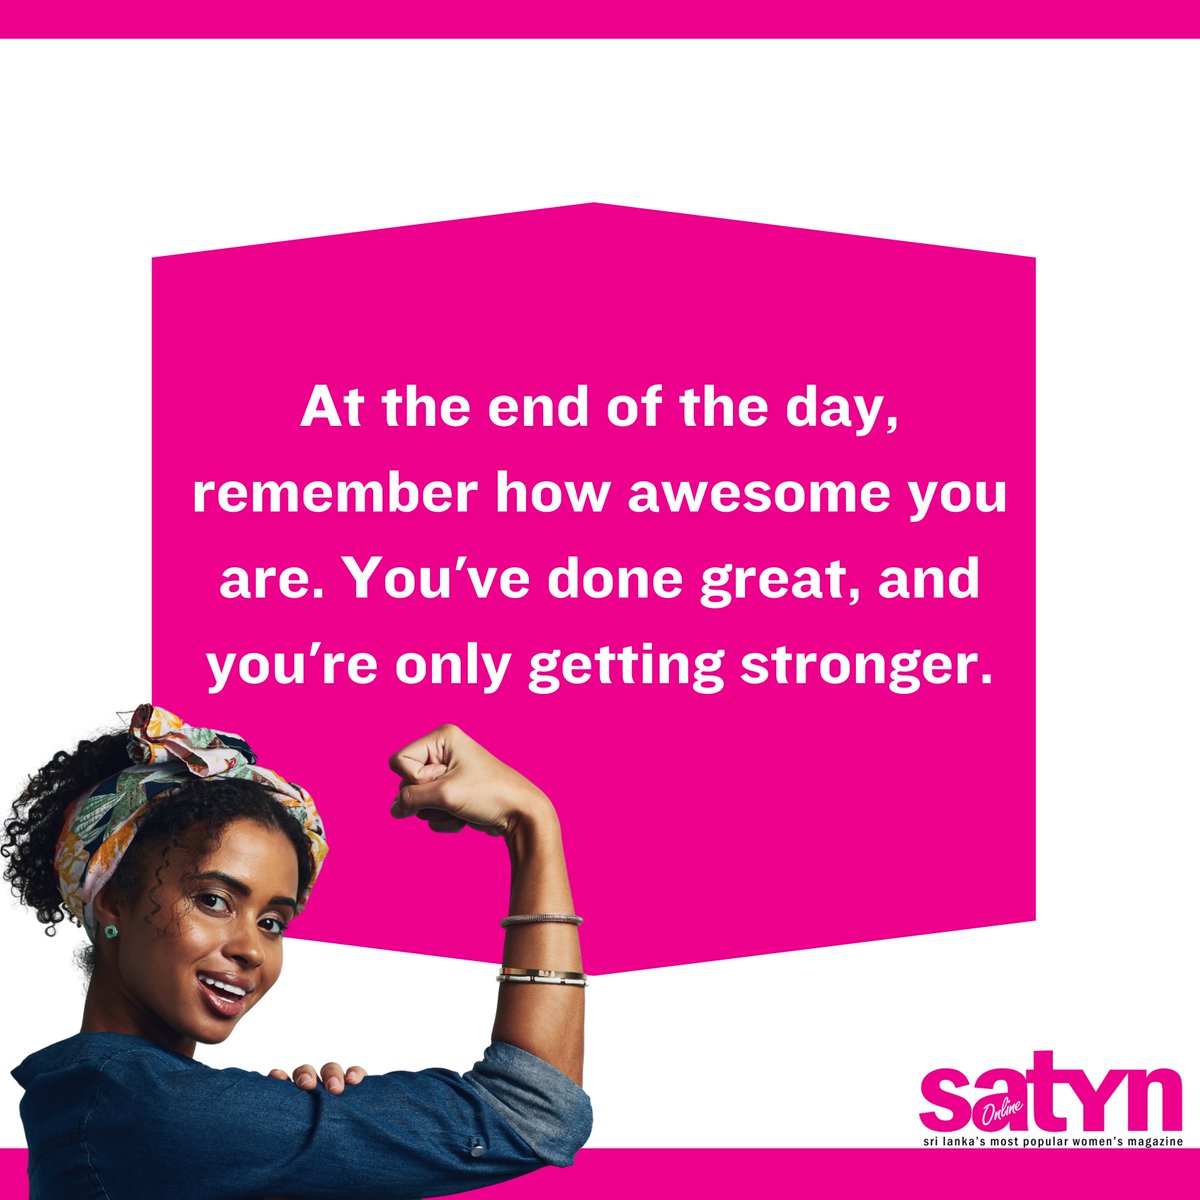 To the strong woman reading this,

You are great, you are enough, and you are amazing. Don't worry you will only grow stronger!

We know you do a lot of things to keep going. Would you mind telling us in the comments? We know you will empower a lot of other women as well!